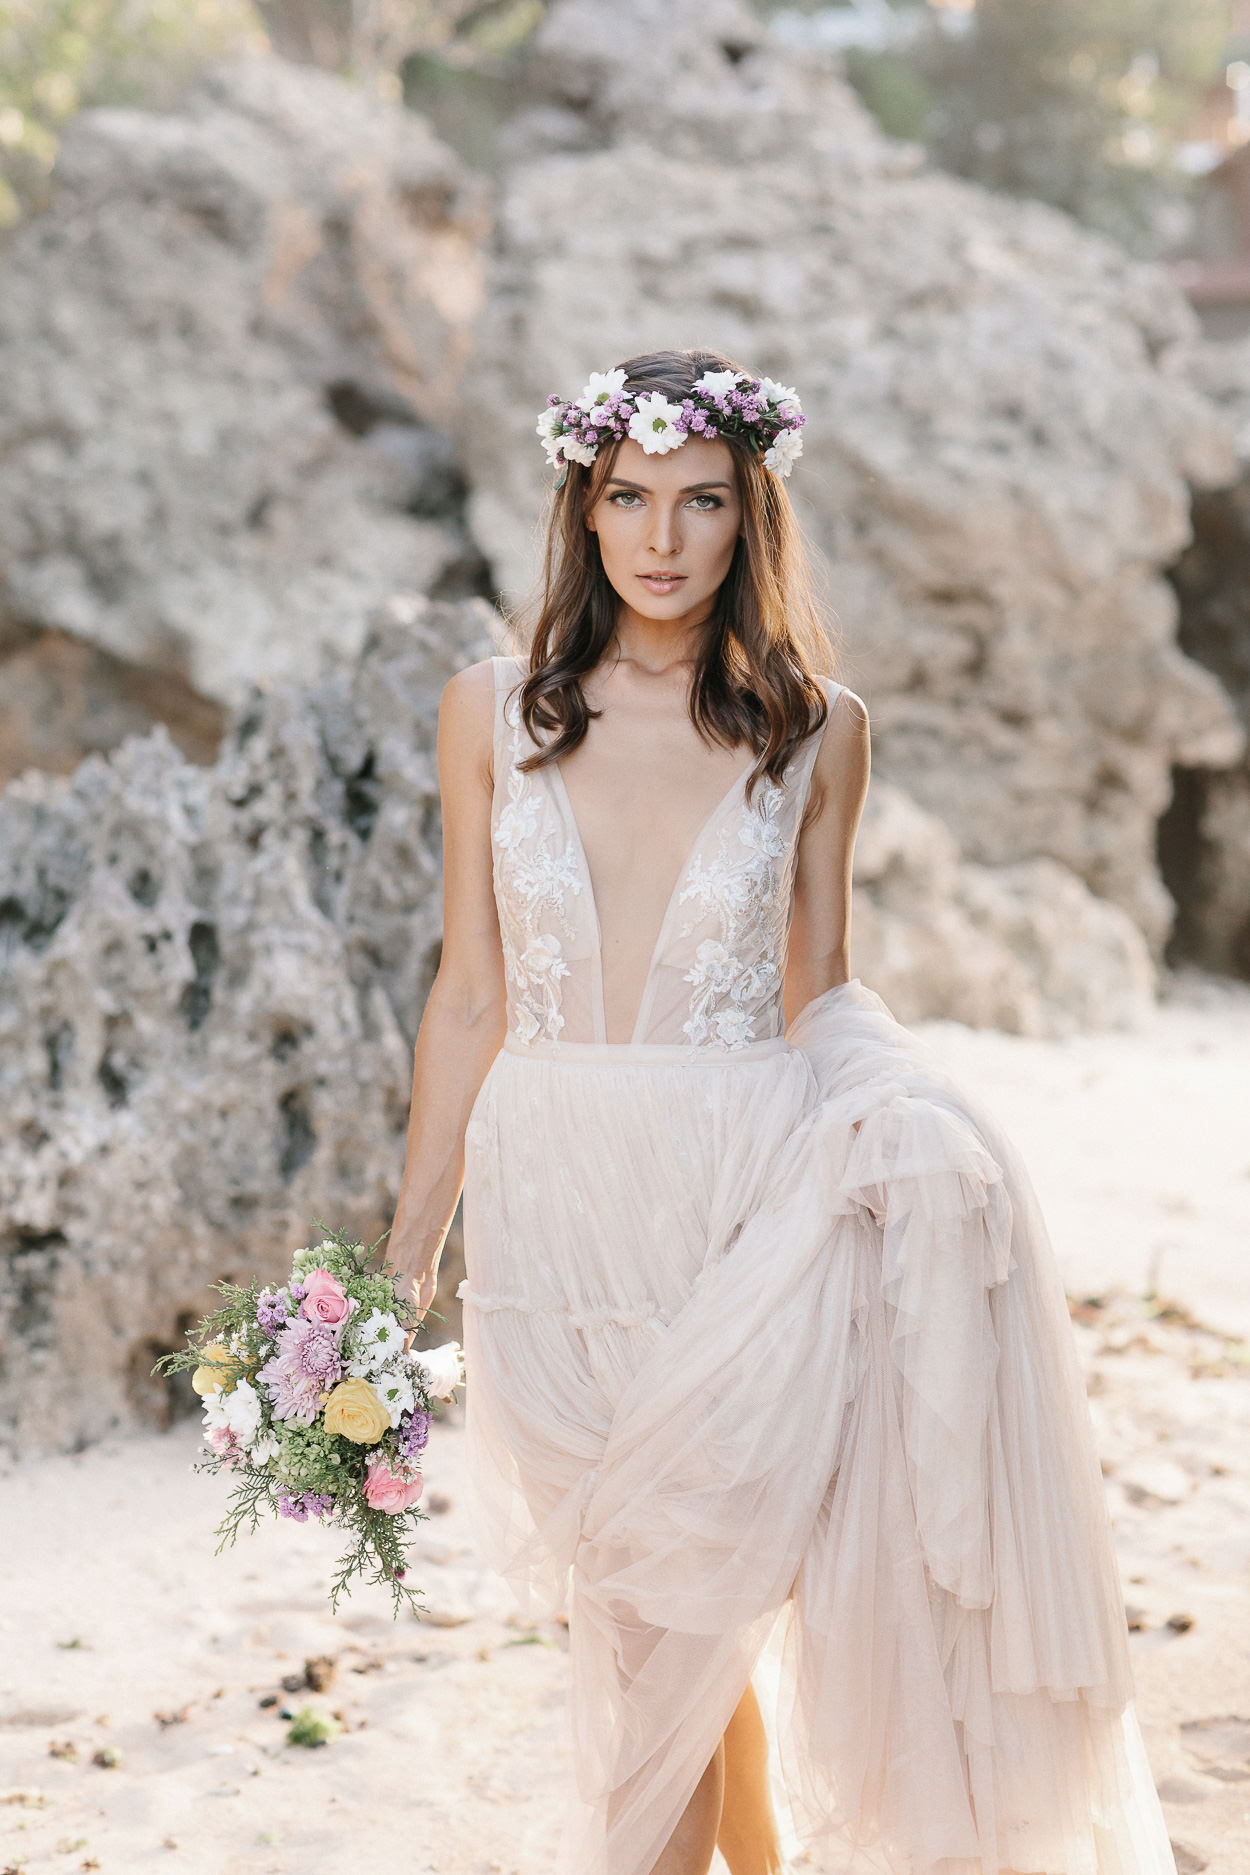 Bali editorial photo session styled shoot